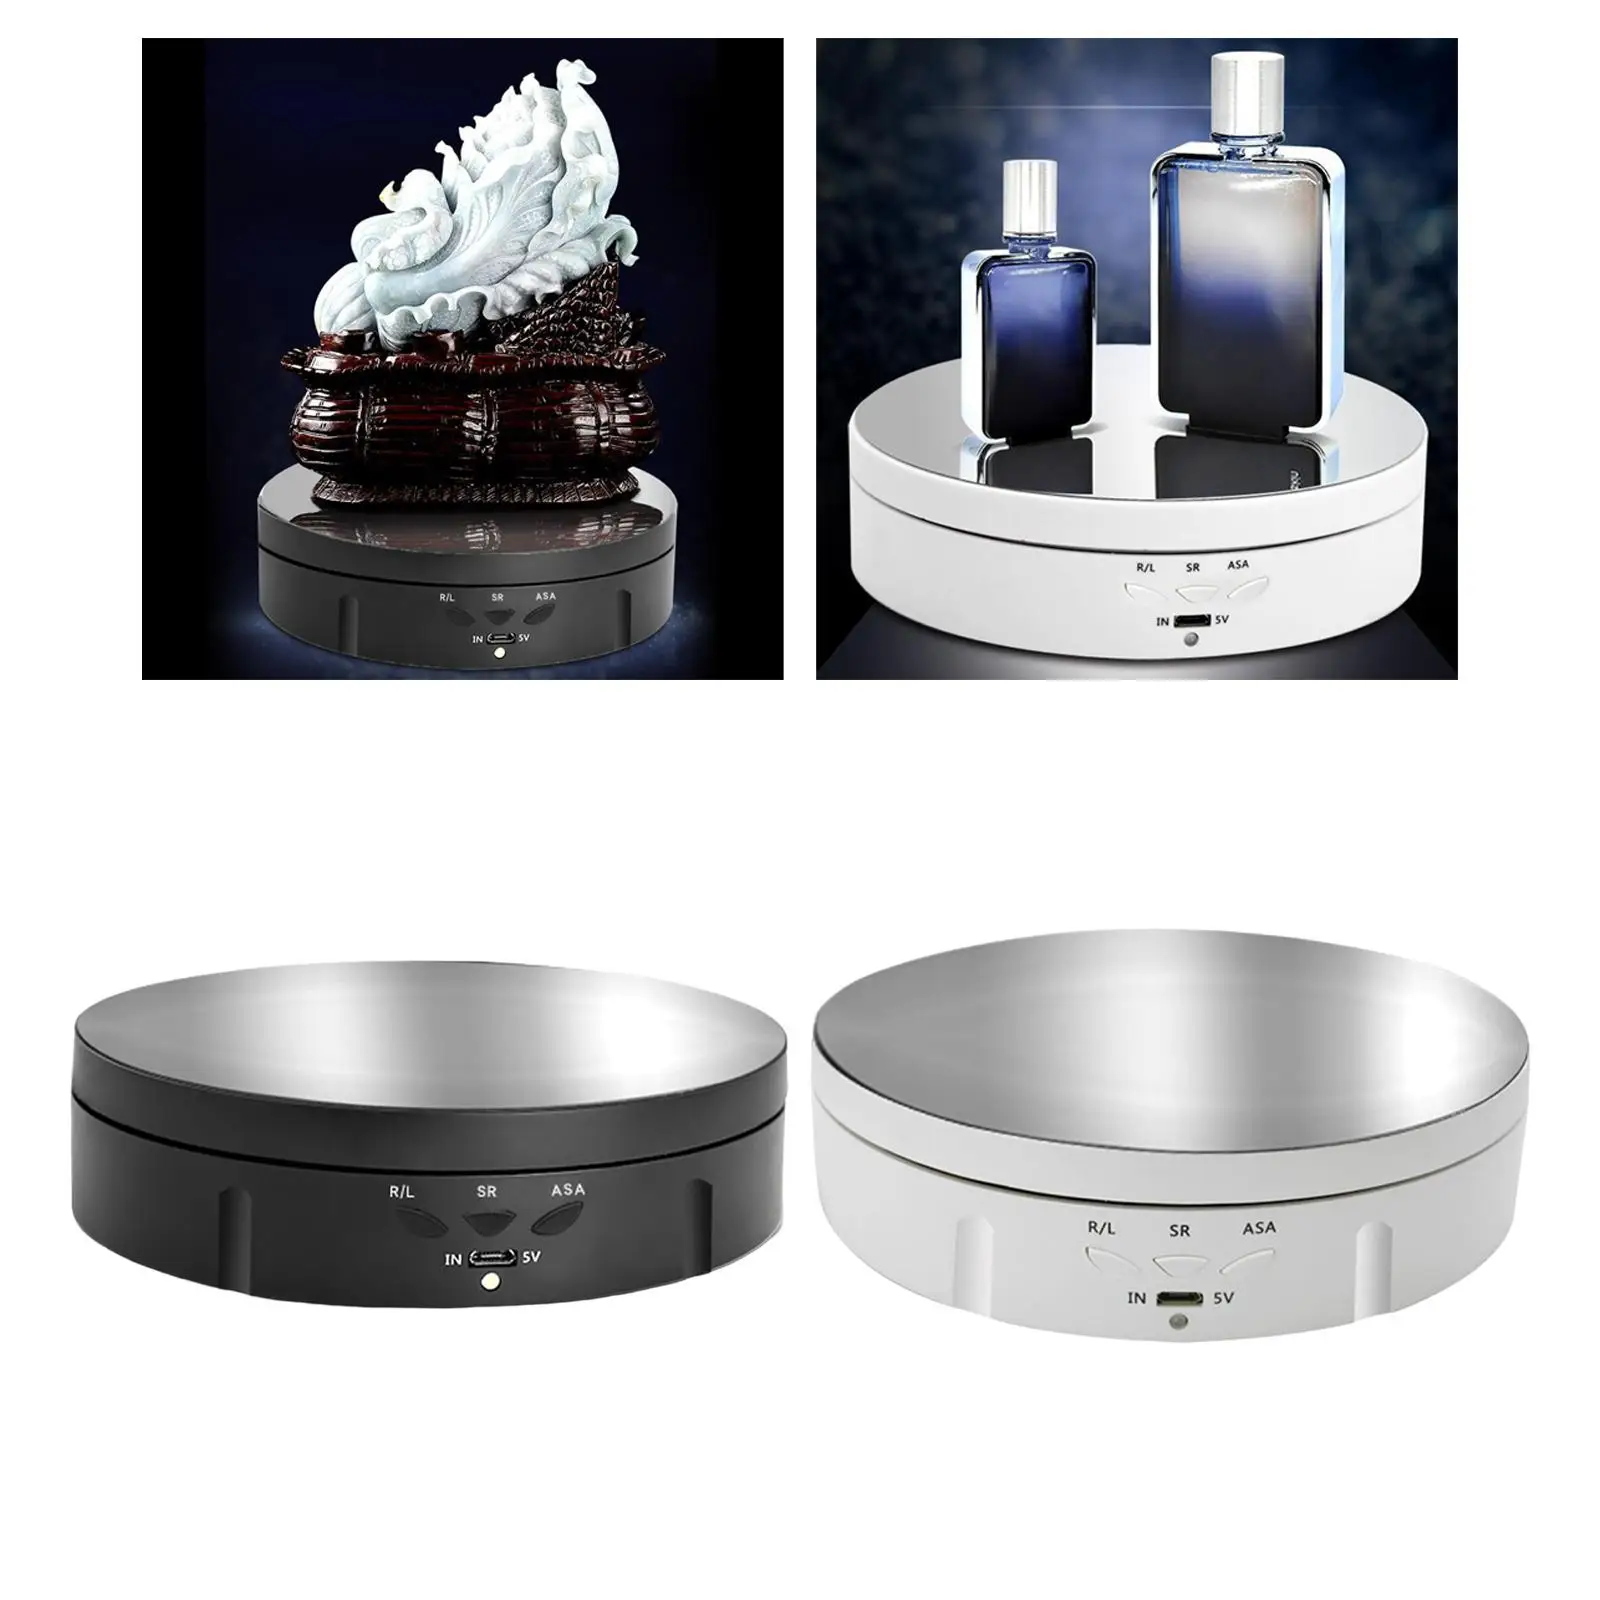 360 Degree Motorized Rotating Display Stand Electronic Rotating Turntable Jewelry Holder for Photography Products Shows Jewelry